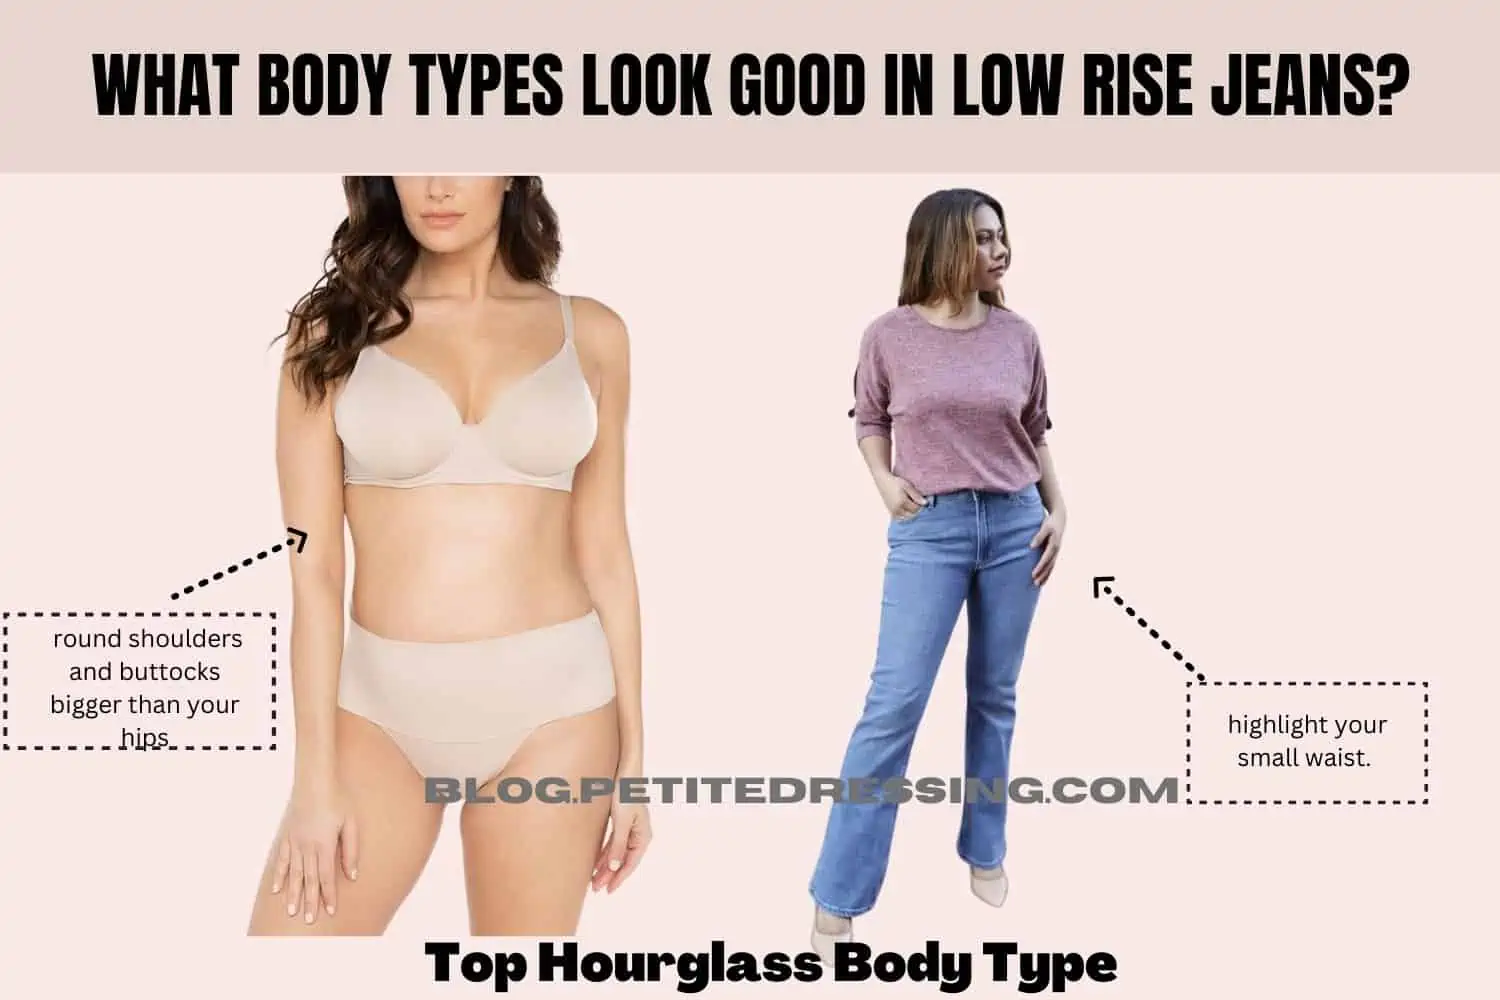 What Body Types Look Good in Low Rise Jeans? - Petite Dressing